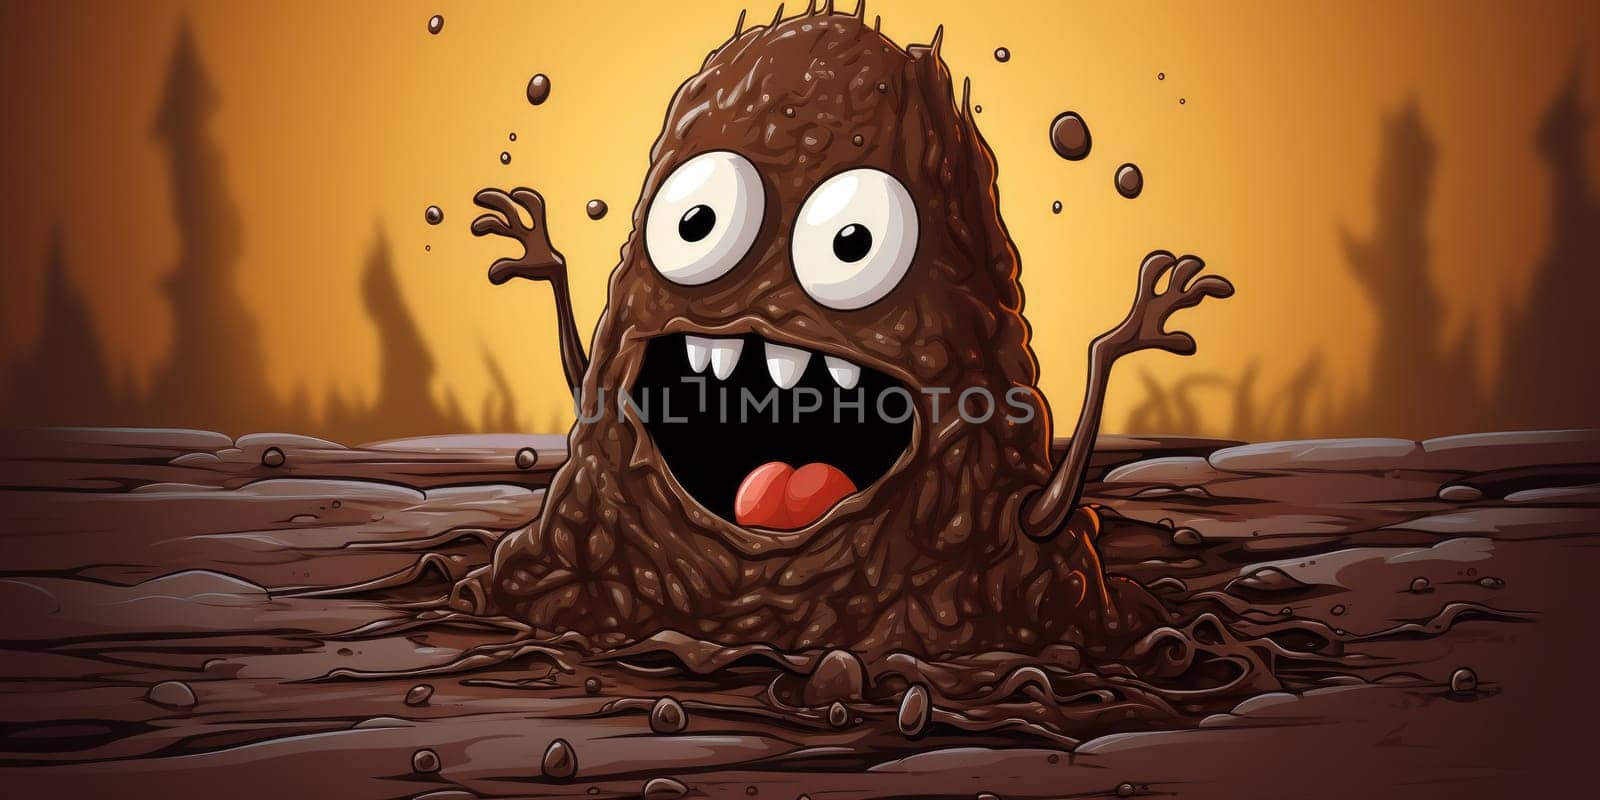 Smiling poop or turd as illustration, funny concept by Kadula